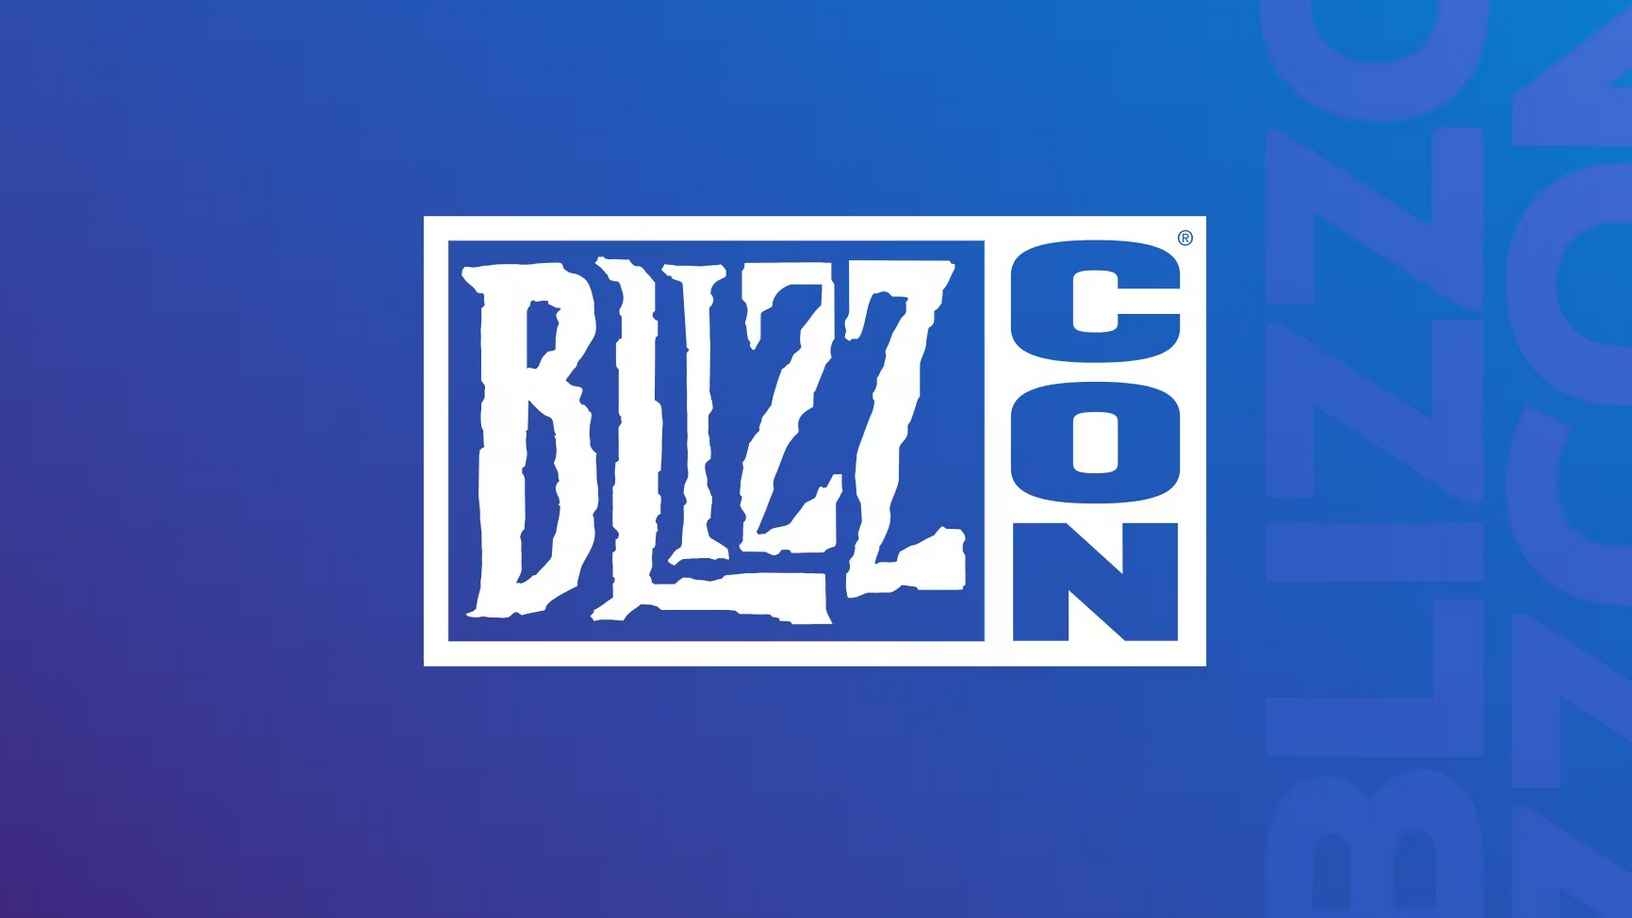 No BlizzCon This Year, but Blizzard Confirms gamescom Presence